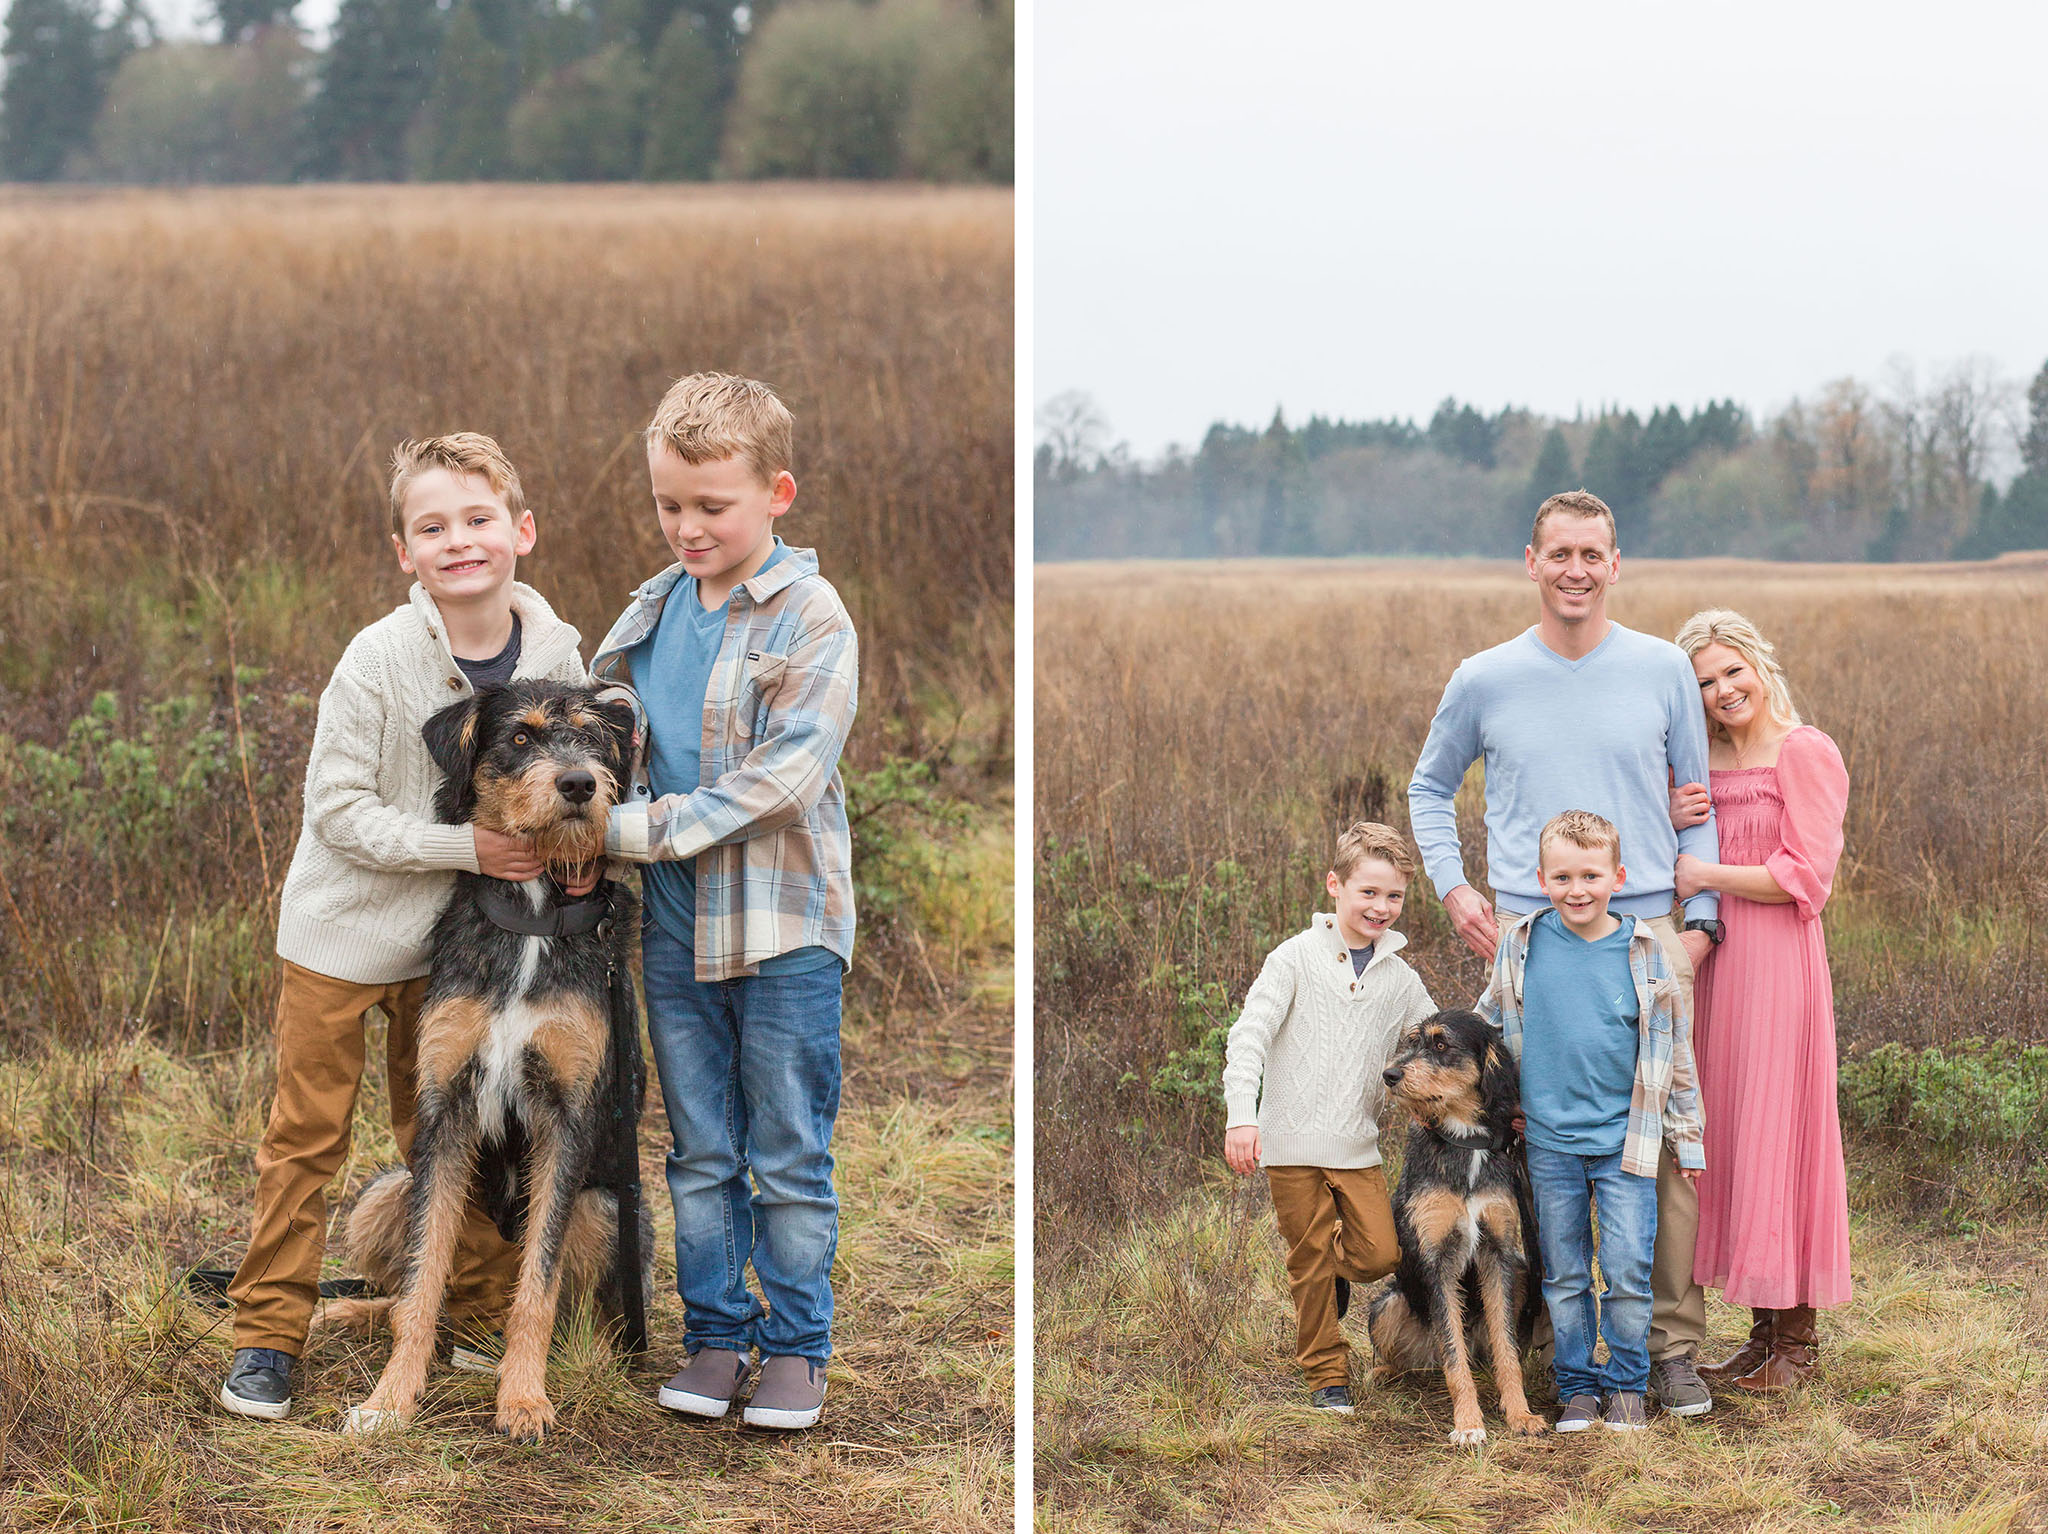 family photos in newberg oregon field on a rainy day with a dog